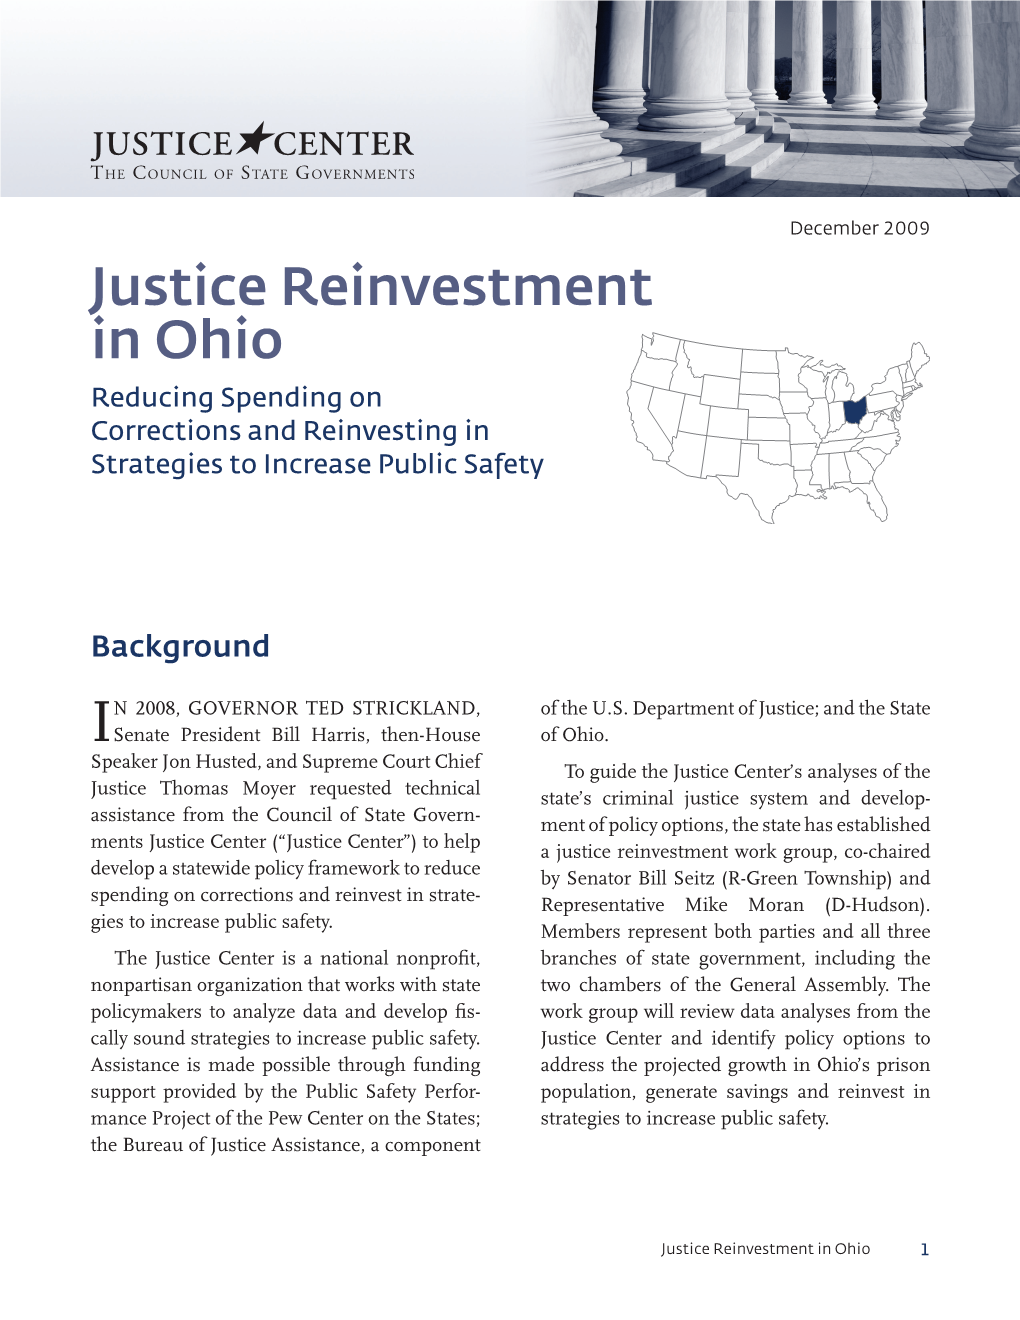 Justice Reinvestment in Ohio Reducing Spending on Corrections and Reinvesting in Strategies to Increase Public Safety